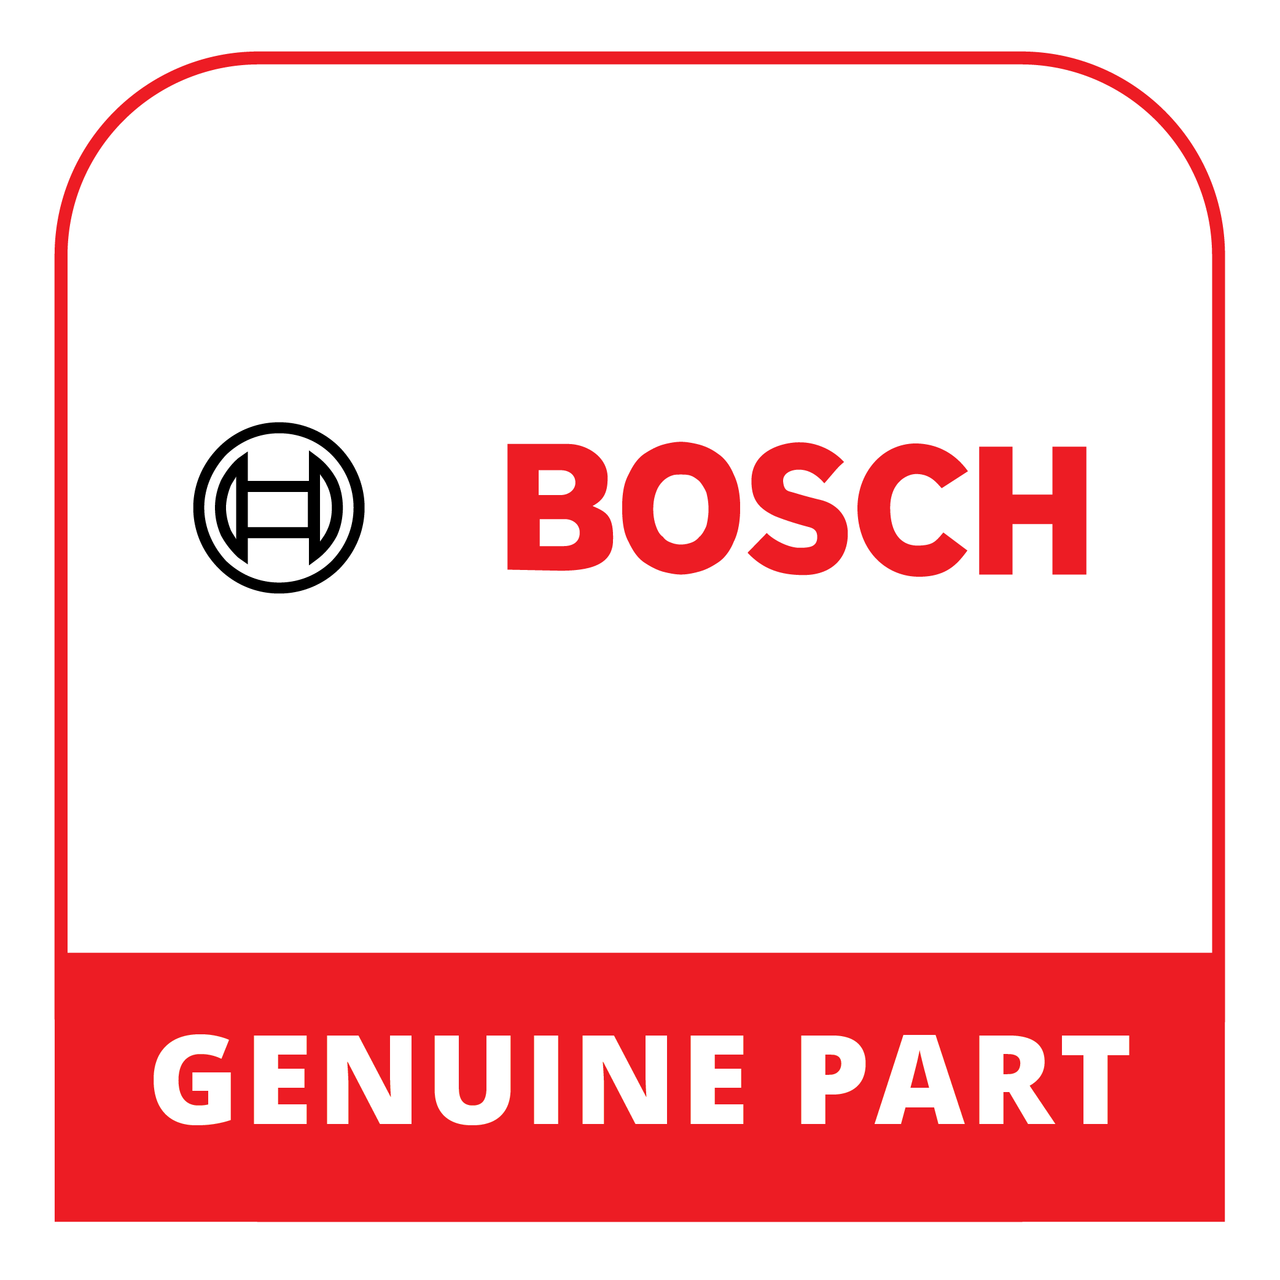 Bosch (Thermador) 20001276 - Drawer - Genuine Bosch (Thermador) Part